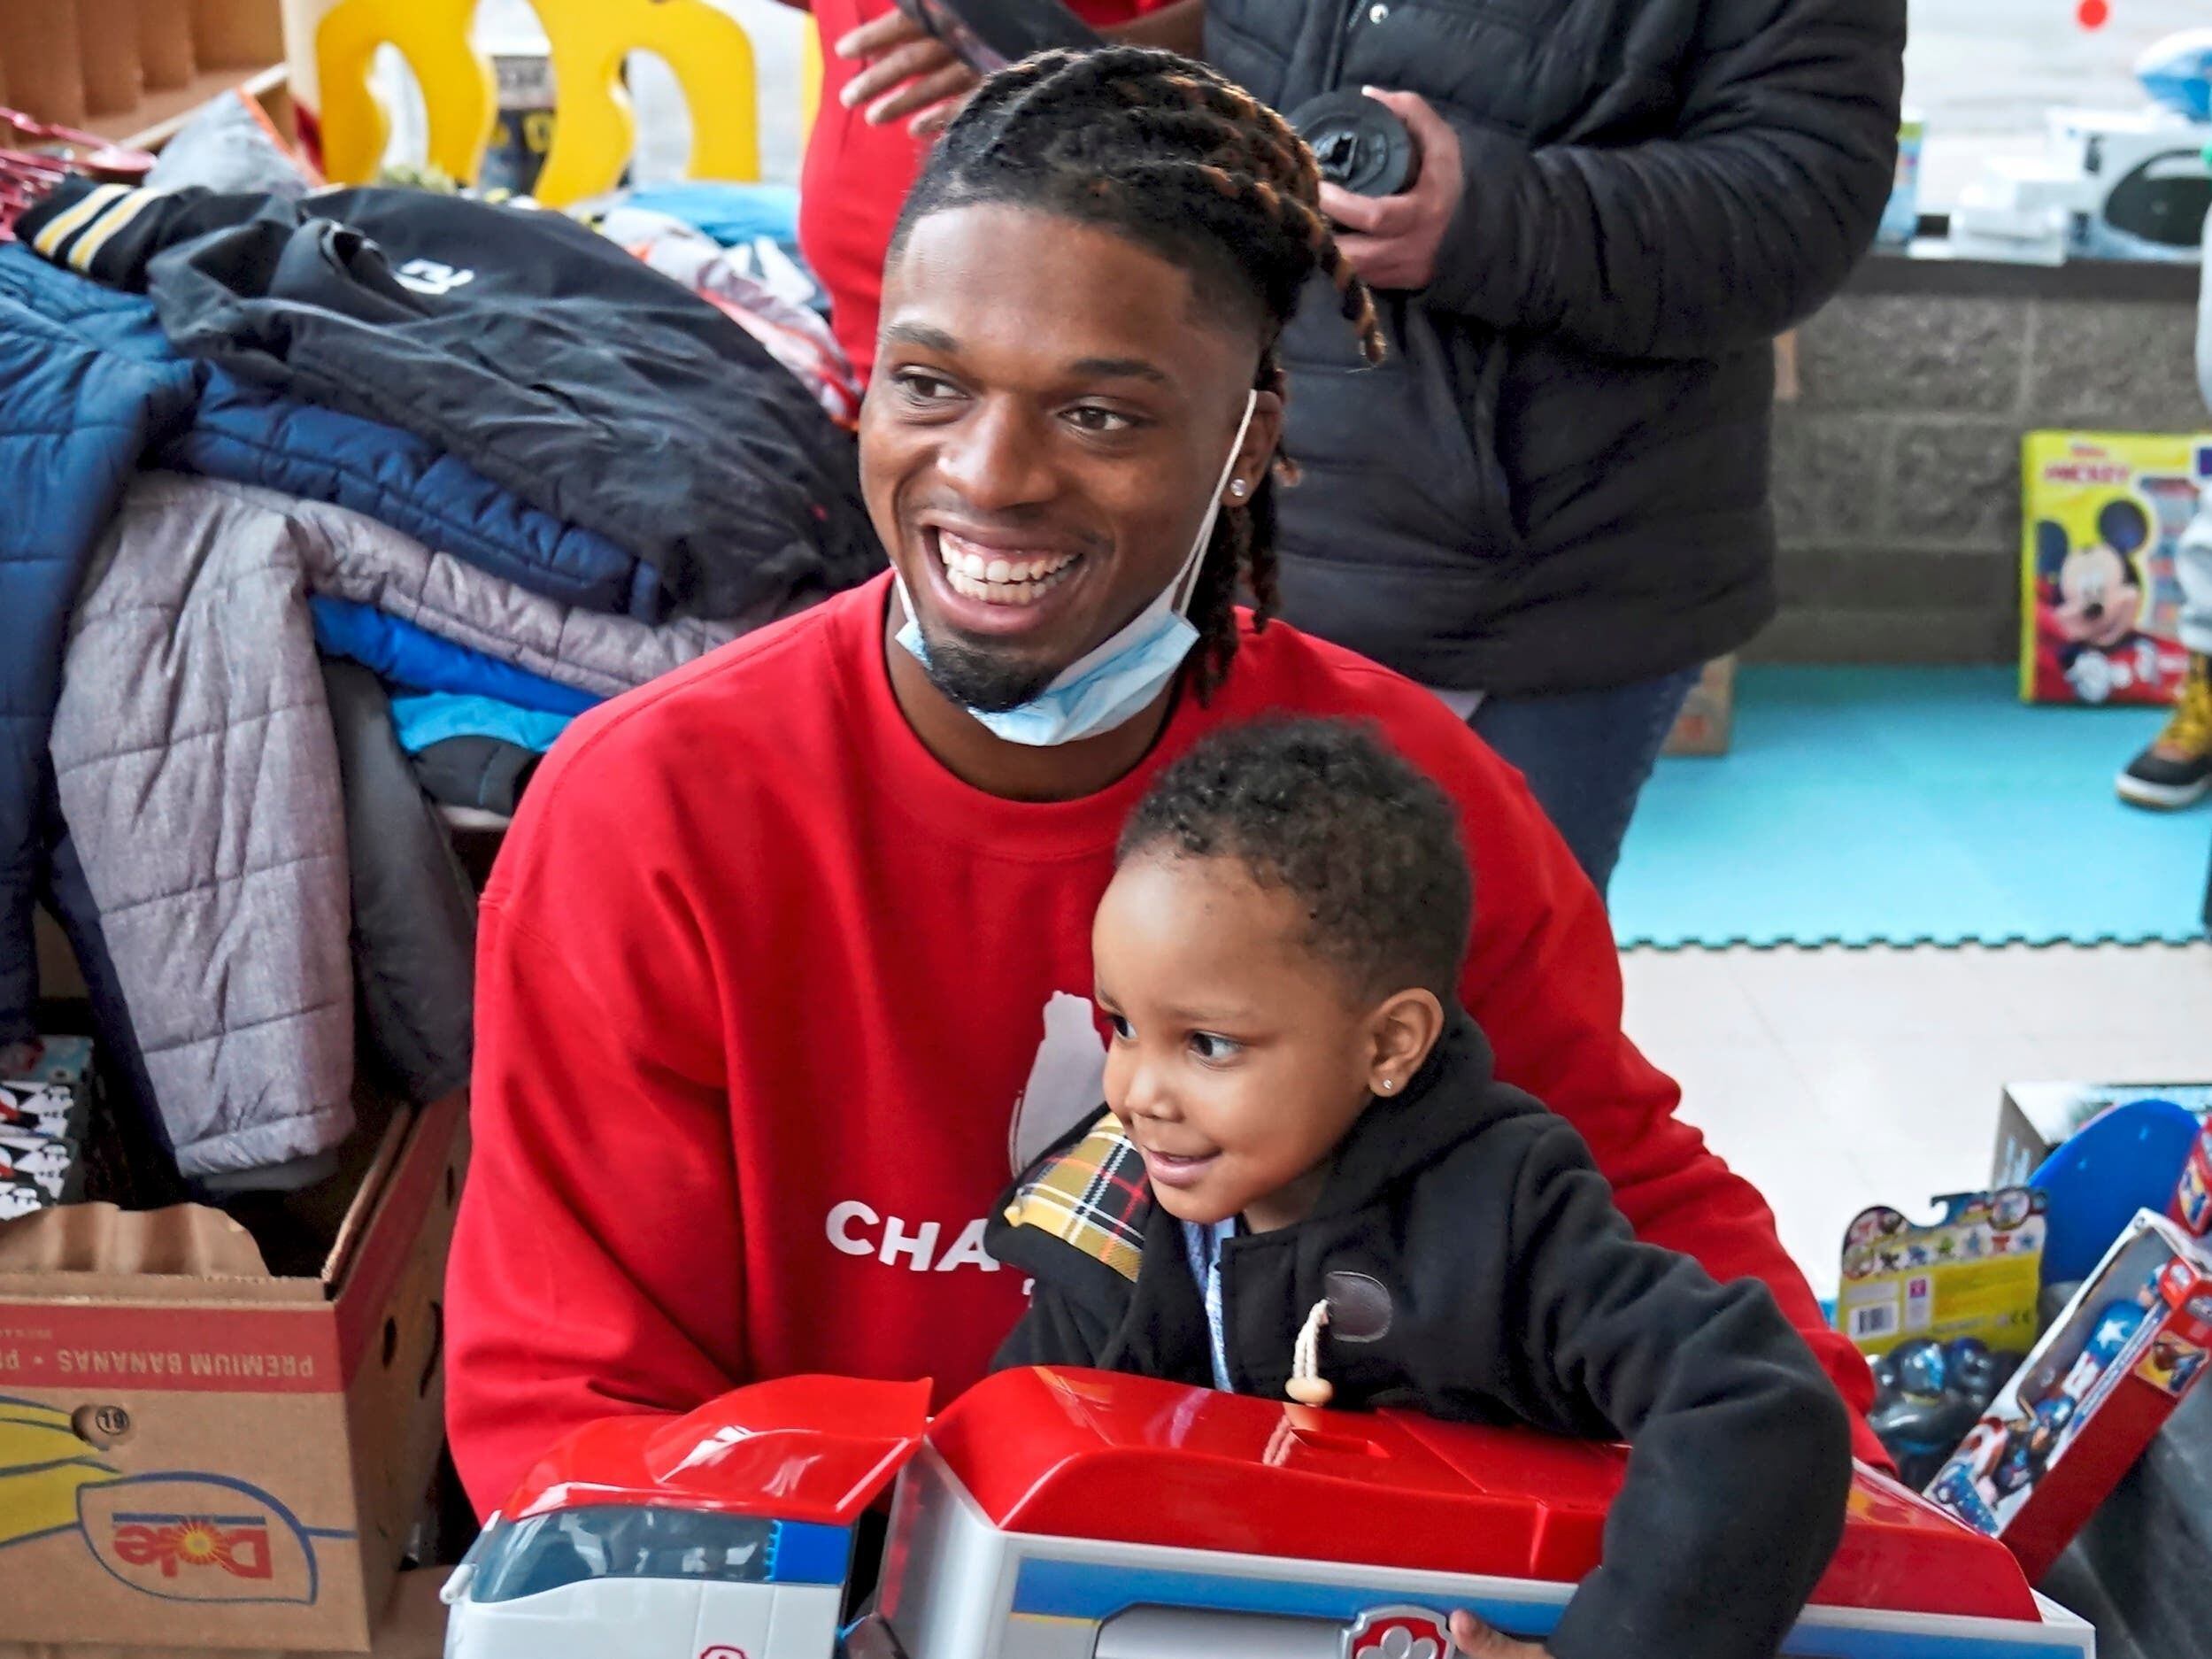 Fans give millions to injured NFL player Damar Hamlin’s toy drive for children